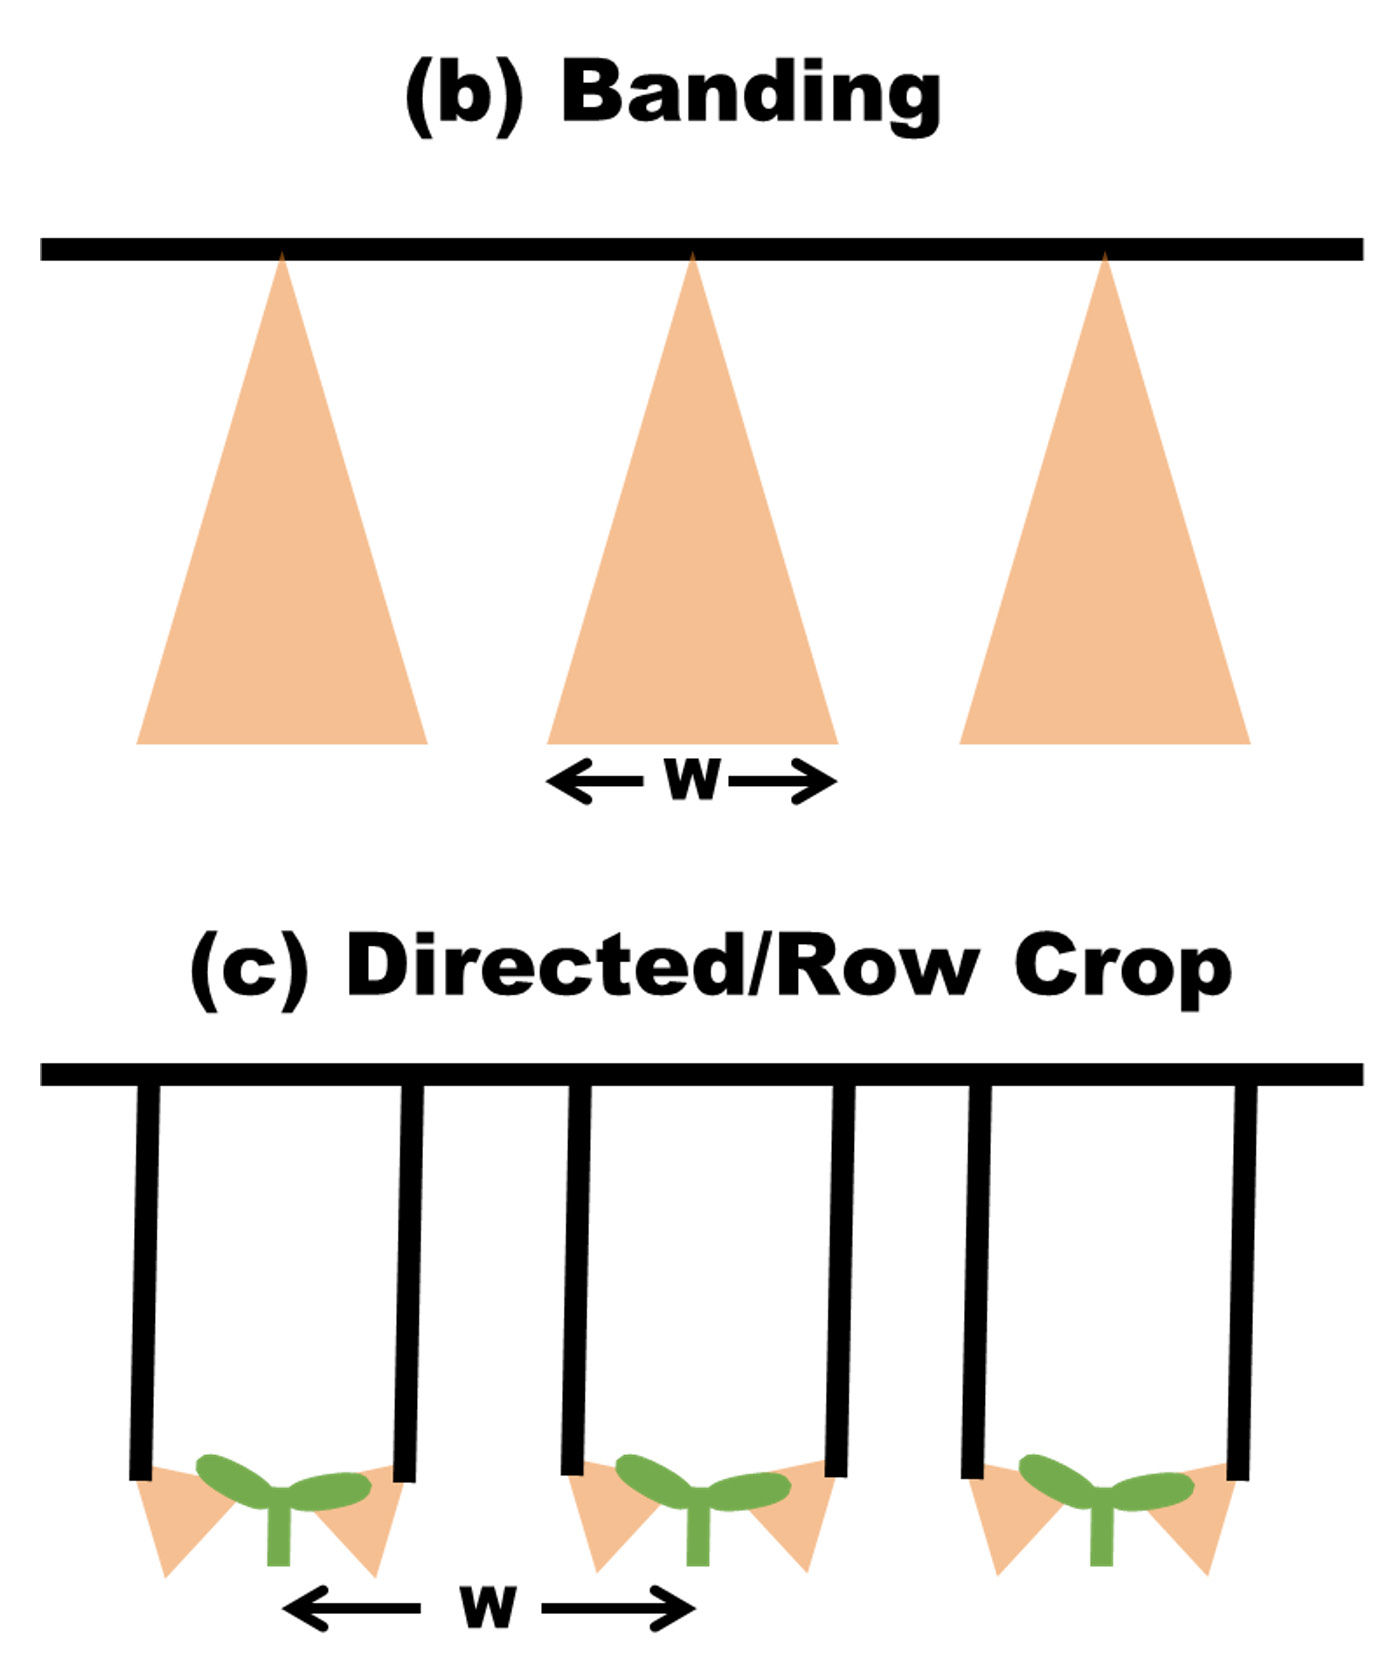 A banding spray pattern and a directed/row crop patter.